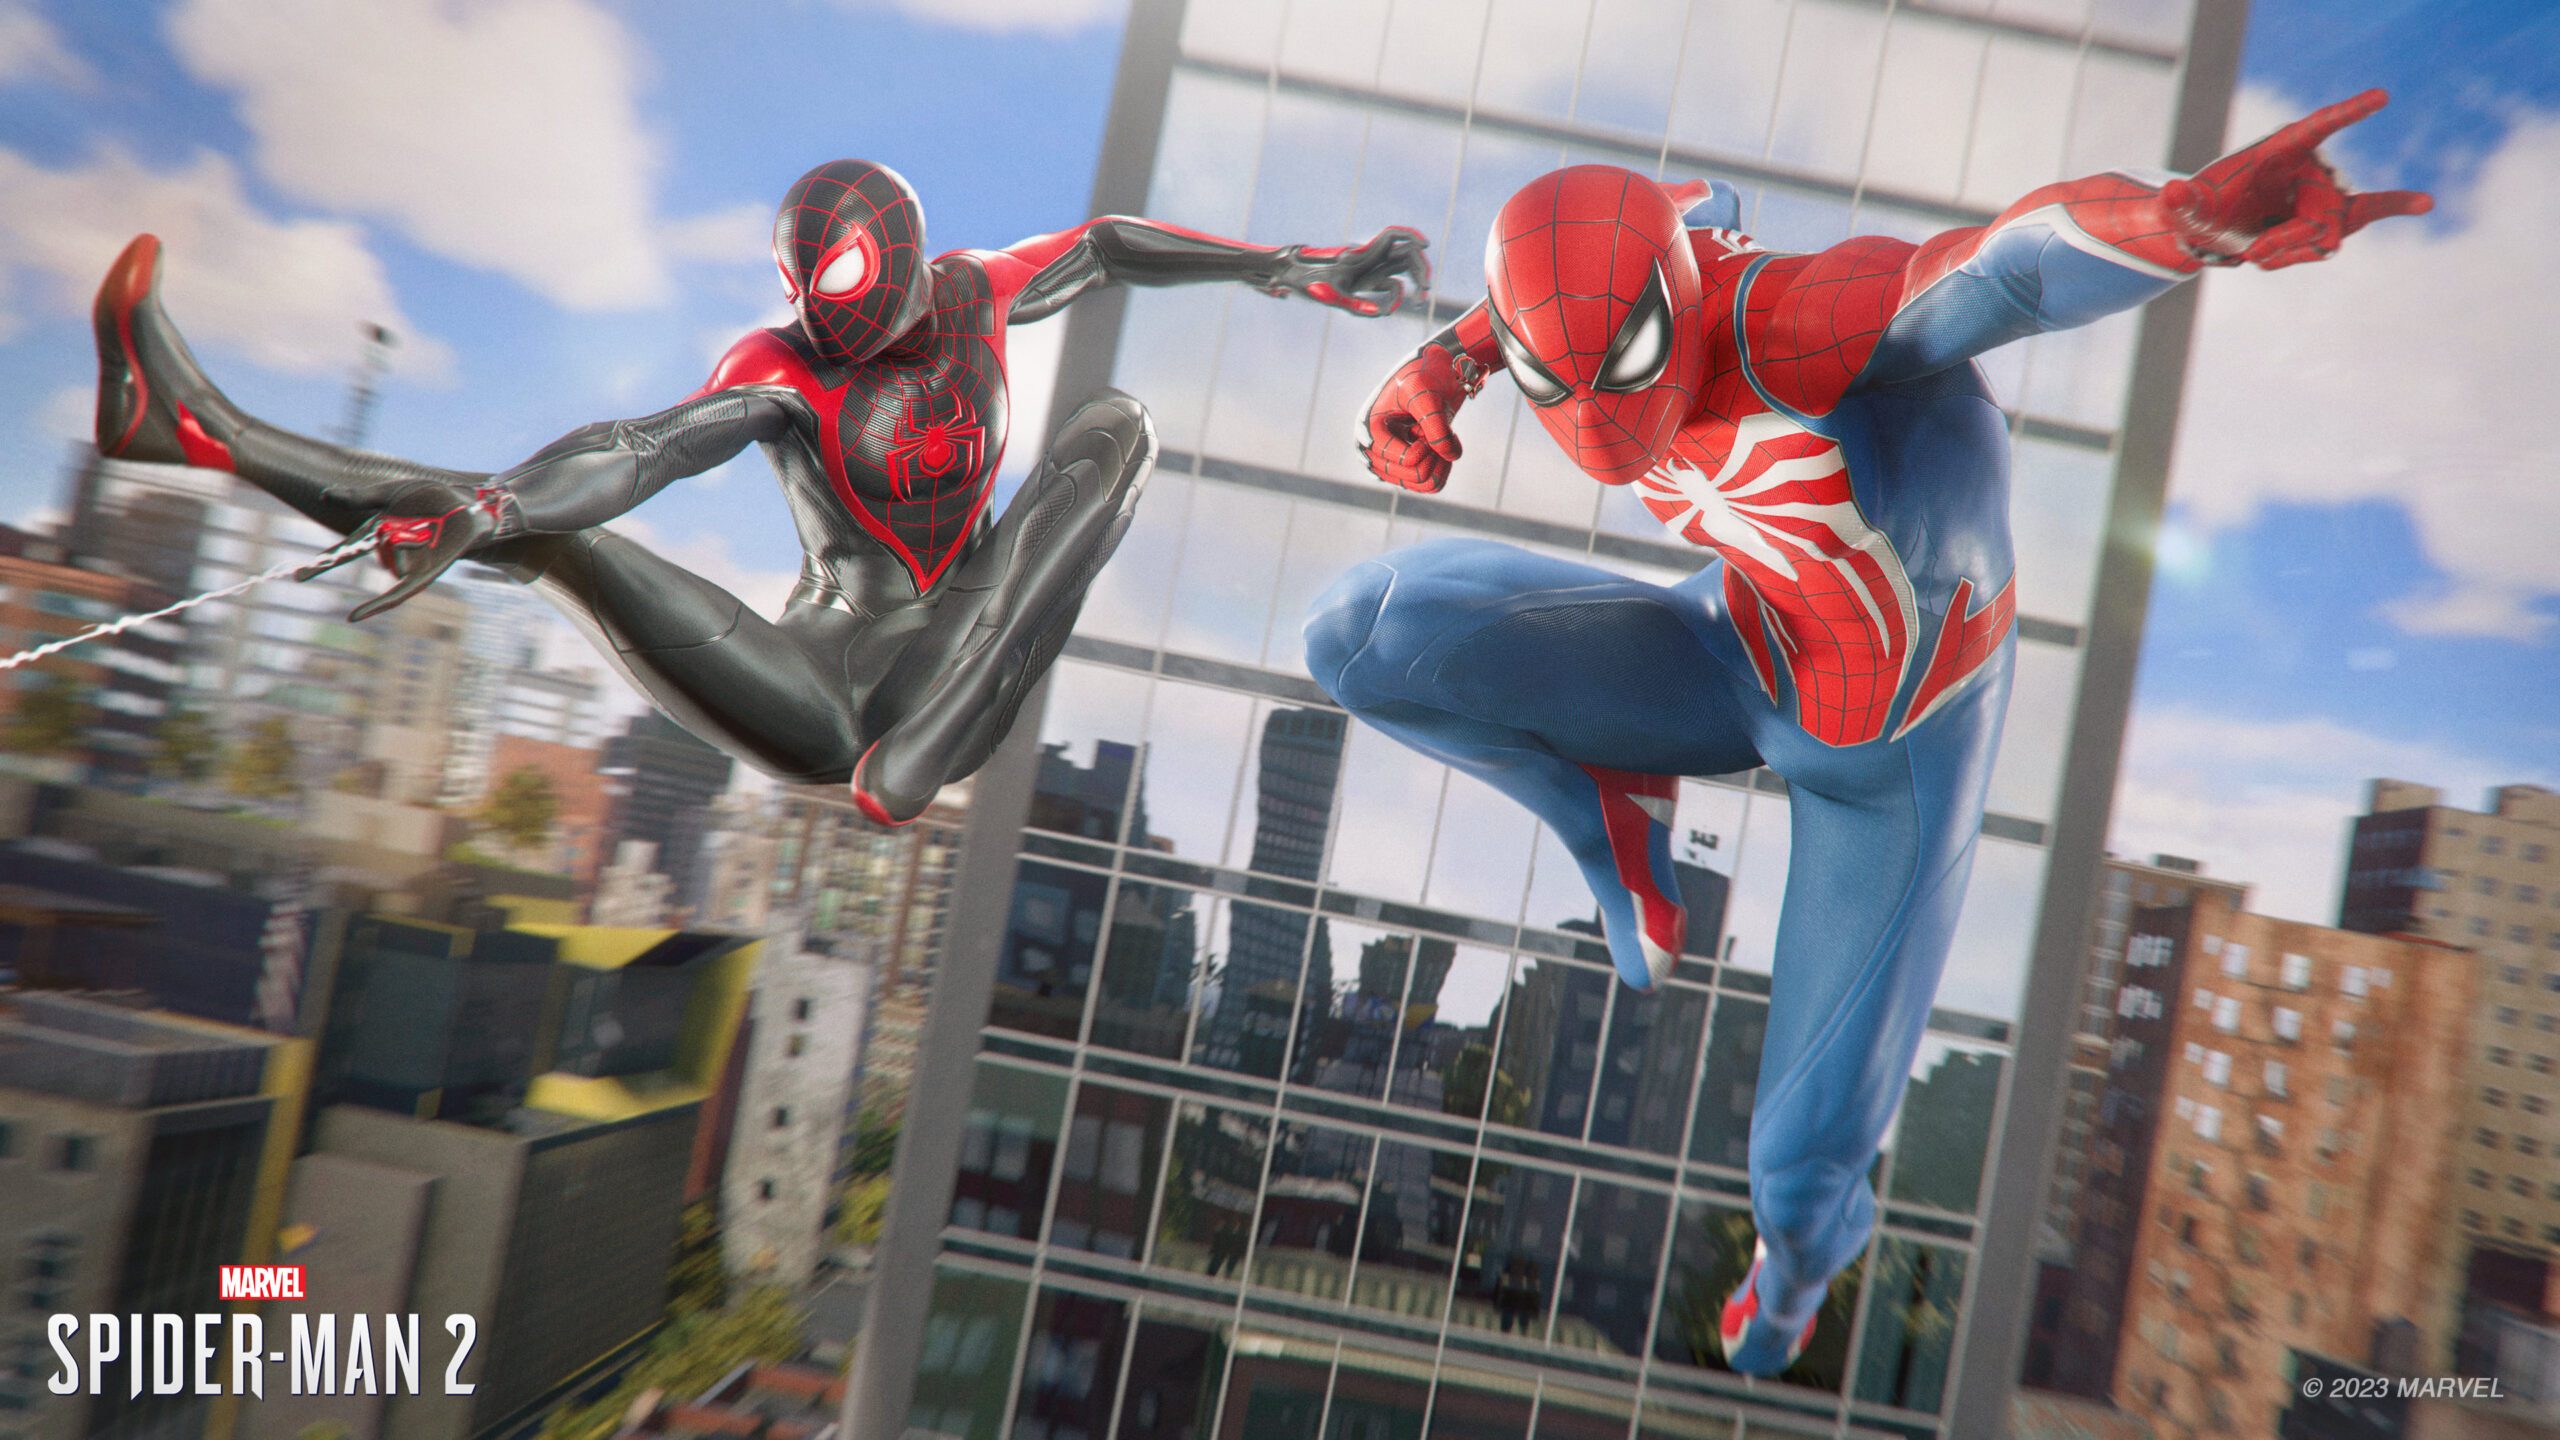 Marvel’s Spider-Man 2 launch interview: Bryan Intihar on the game’s opening sequence, ASL, accessibility options, and more